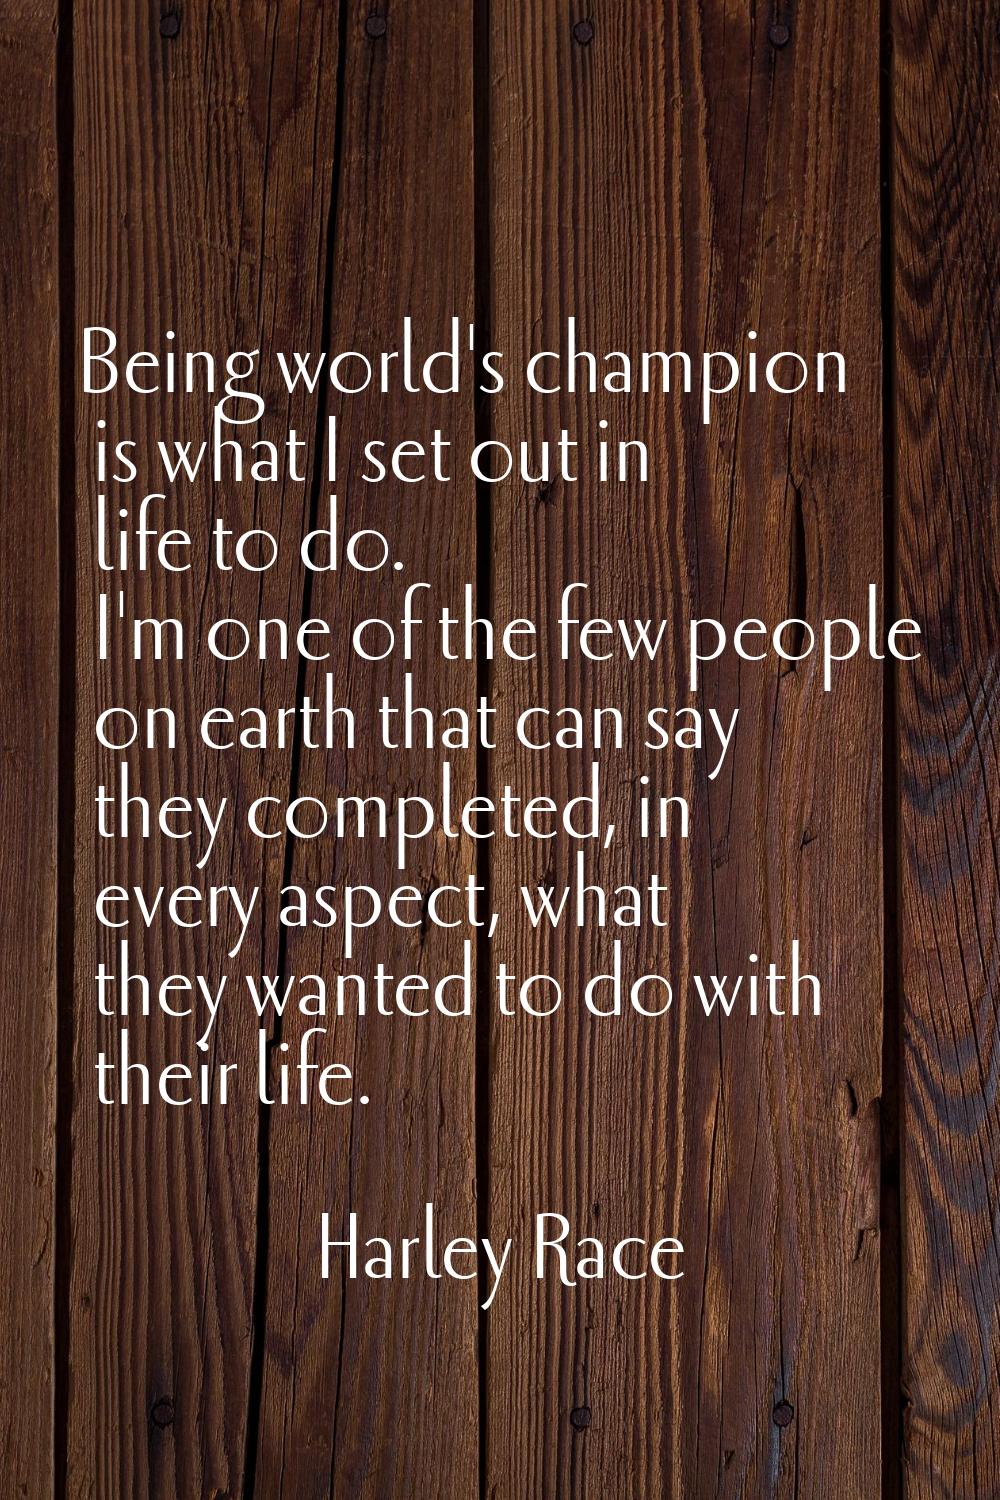 Being world's champion is what I set out in life to do. I'm one of the few people on earth that can